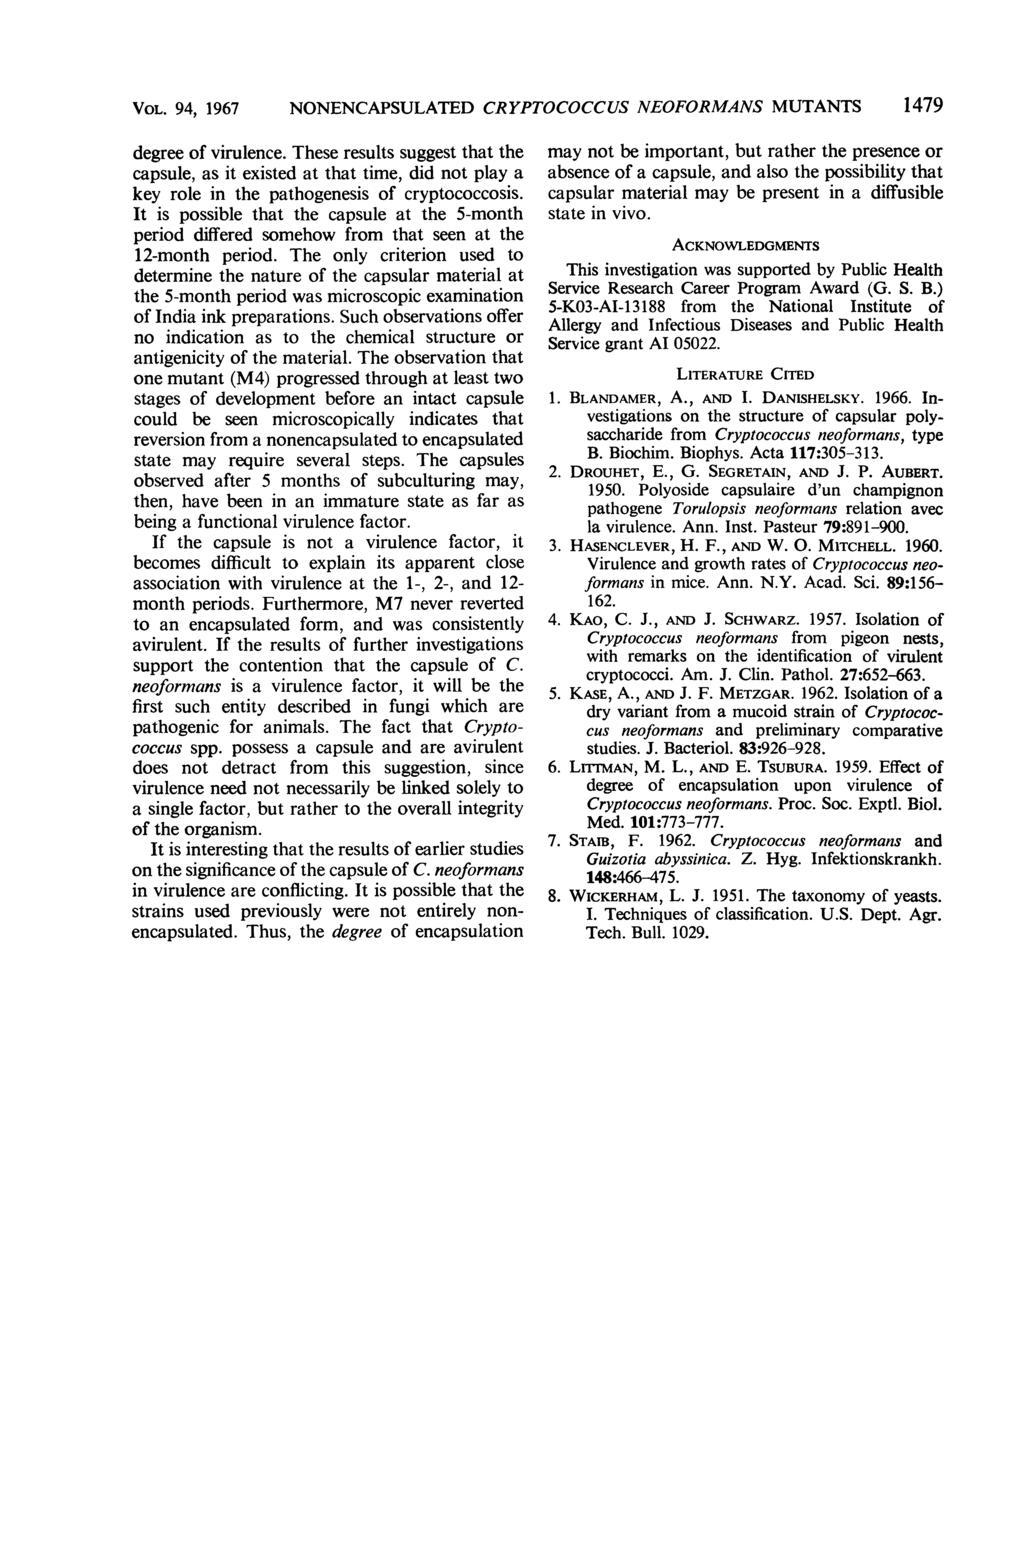 VOL. 94, 1967 NONENCAPSULATED CRYPTOCOCCUS NEOFORMANS MUTANTS 1479 degree of virulence.